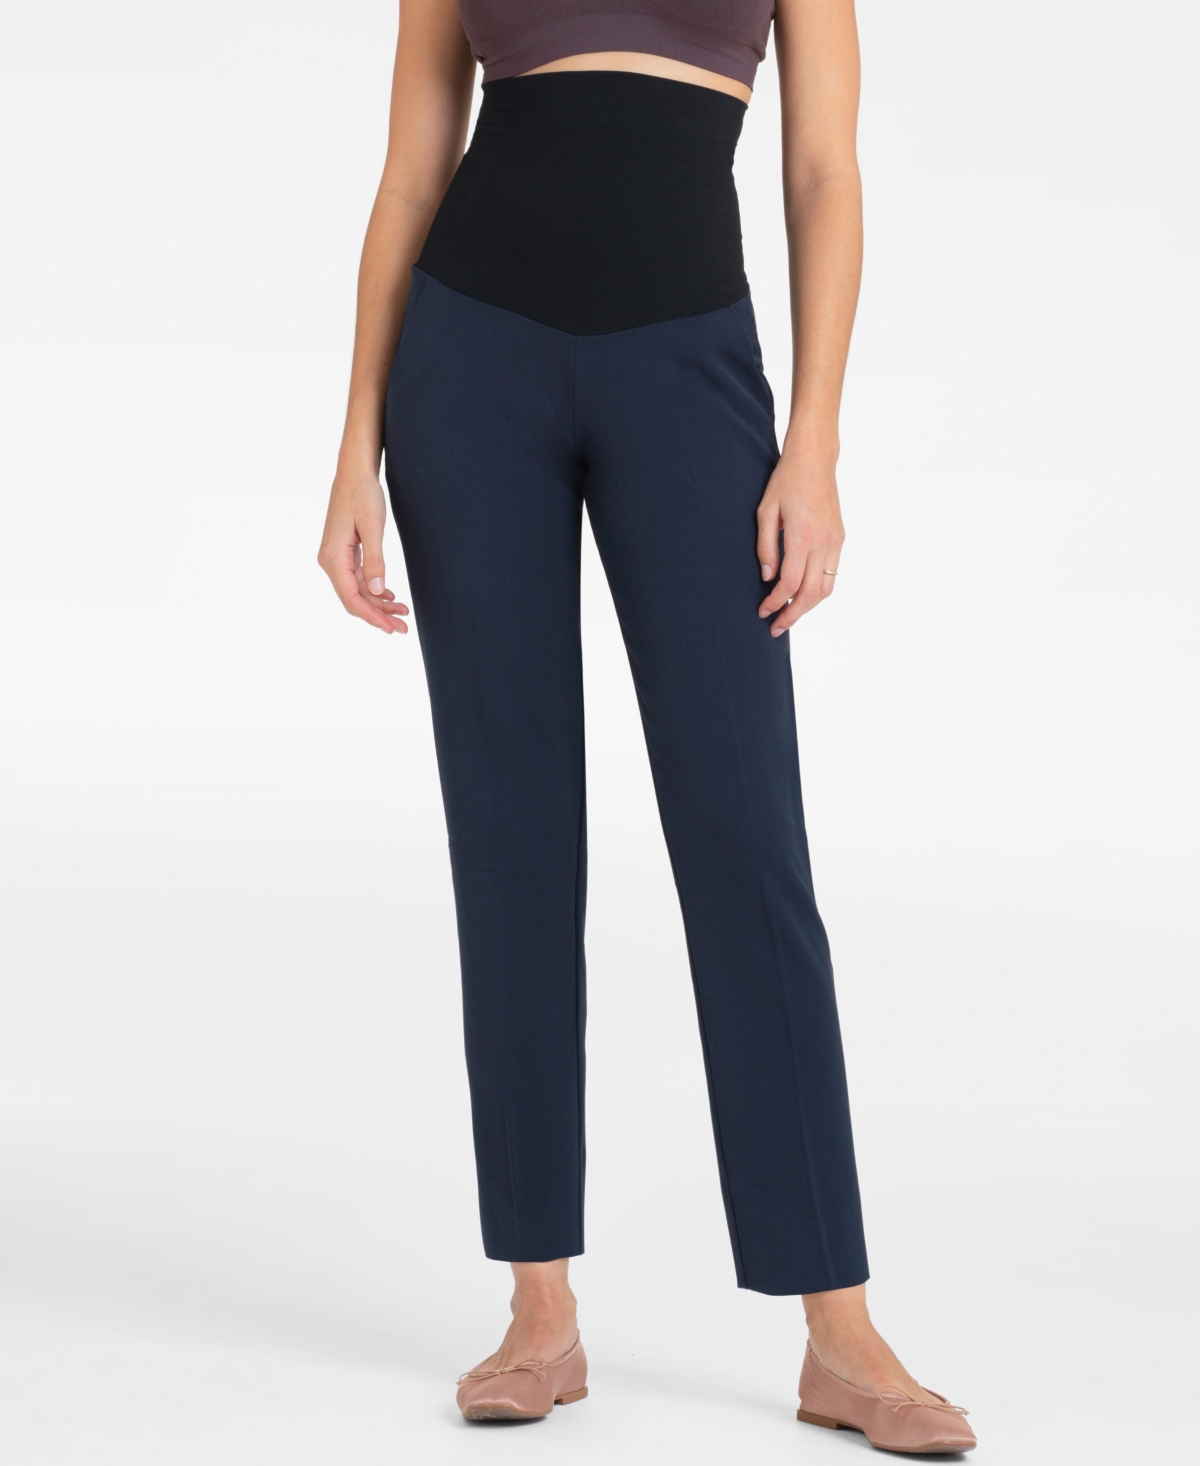 Seraphine Women's Tapered Post Maternity Shaping Pants In Navy